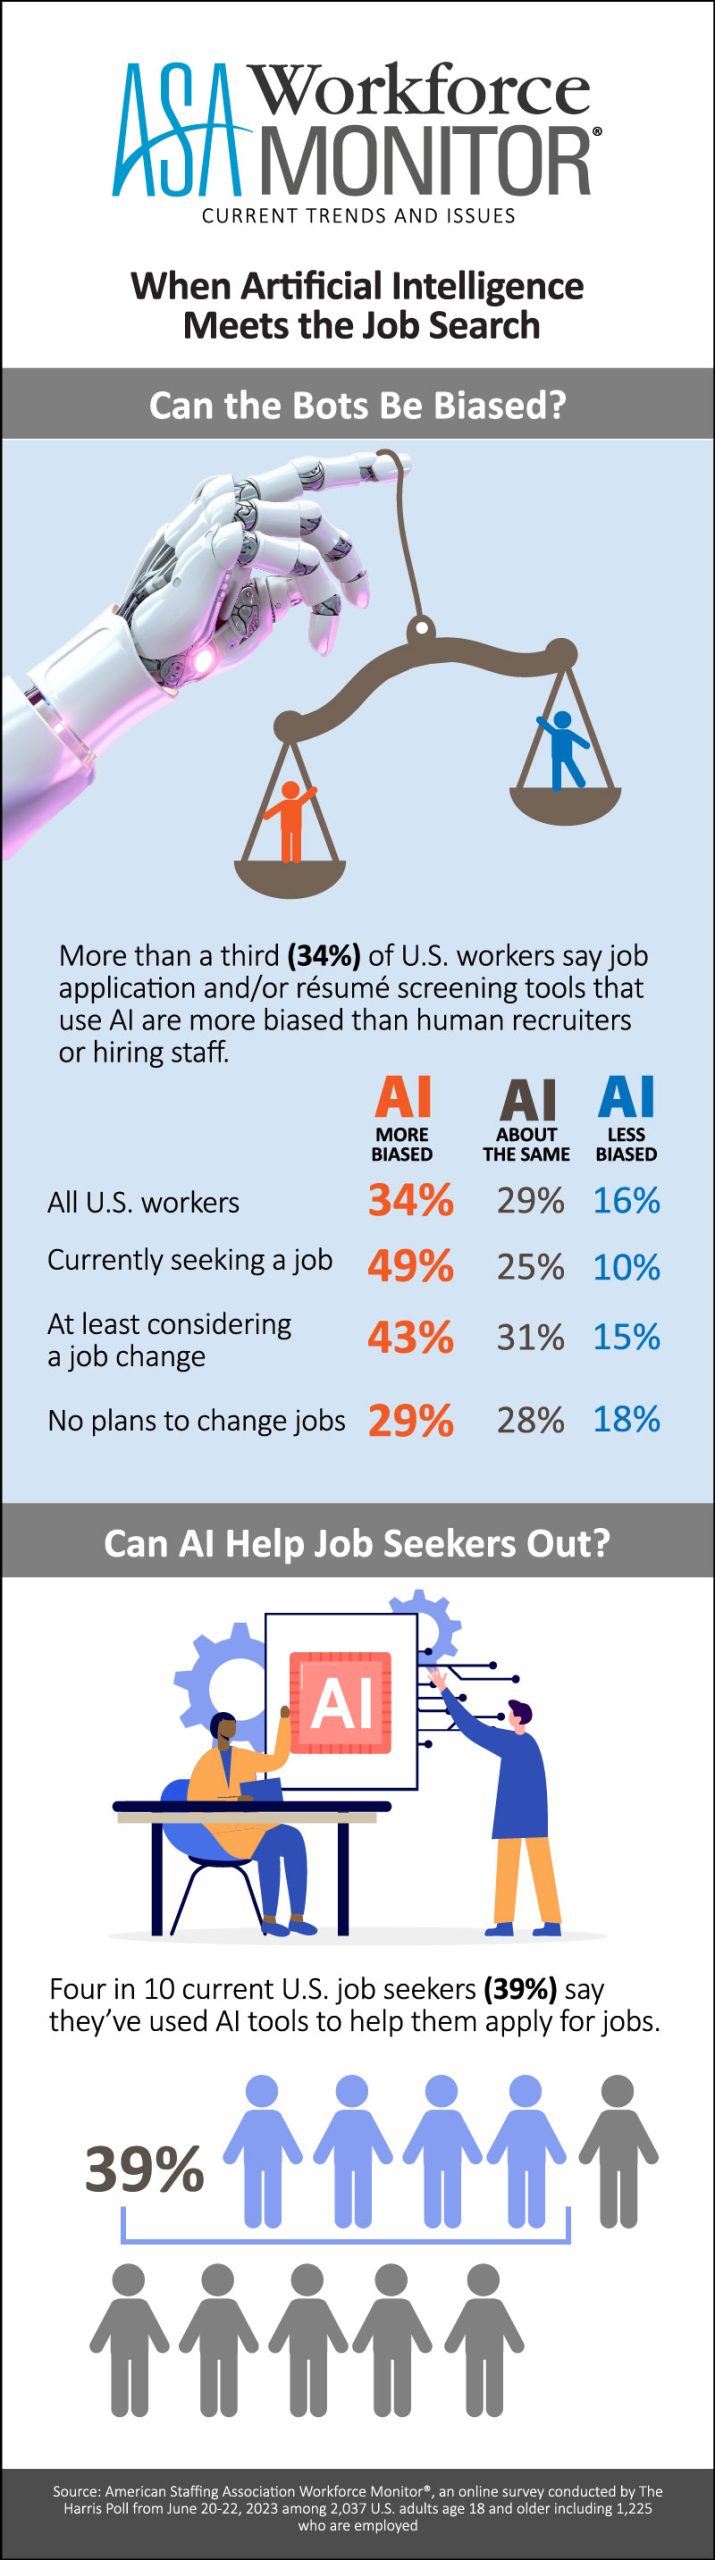 The image is an infographic from the ASA Workforce Monitor discussing the role of artificial intelligence (AI) in job search and its perceived biases. The top section contains the title and subtitle: "ASA Workforce Monitor: Current Trends and Issues" and "When Artificial Intelligence Meets the Job Search." Below is a question: "Can the Bots Be Biased?" An image of a robot hand holding scales is displayed, symbolizing the weighing of biases. The text beneath states, "More than a third (34%) of U.S. workers say job application and/or résumé screening tools that use AI are more biased than human recruiters or hiring staff." A table compares opinions on AI bias among different groups: all U.S. workers, job seekers, those considering a job change, and those with no plans to change jobs.

The next section asks, "Can AI Help Job Seekers Out?" depicting two illustrated figures interacting with AI elements, suggesting the potential utility of AI in job applications. A text below states, "Four in 10 current U.S. job seekers (39%) say they’ve used AI tools to help them apply for jobs," accompanied by rows of human icons, visually representing the 39%.